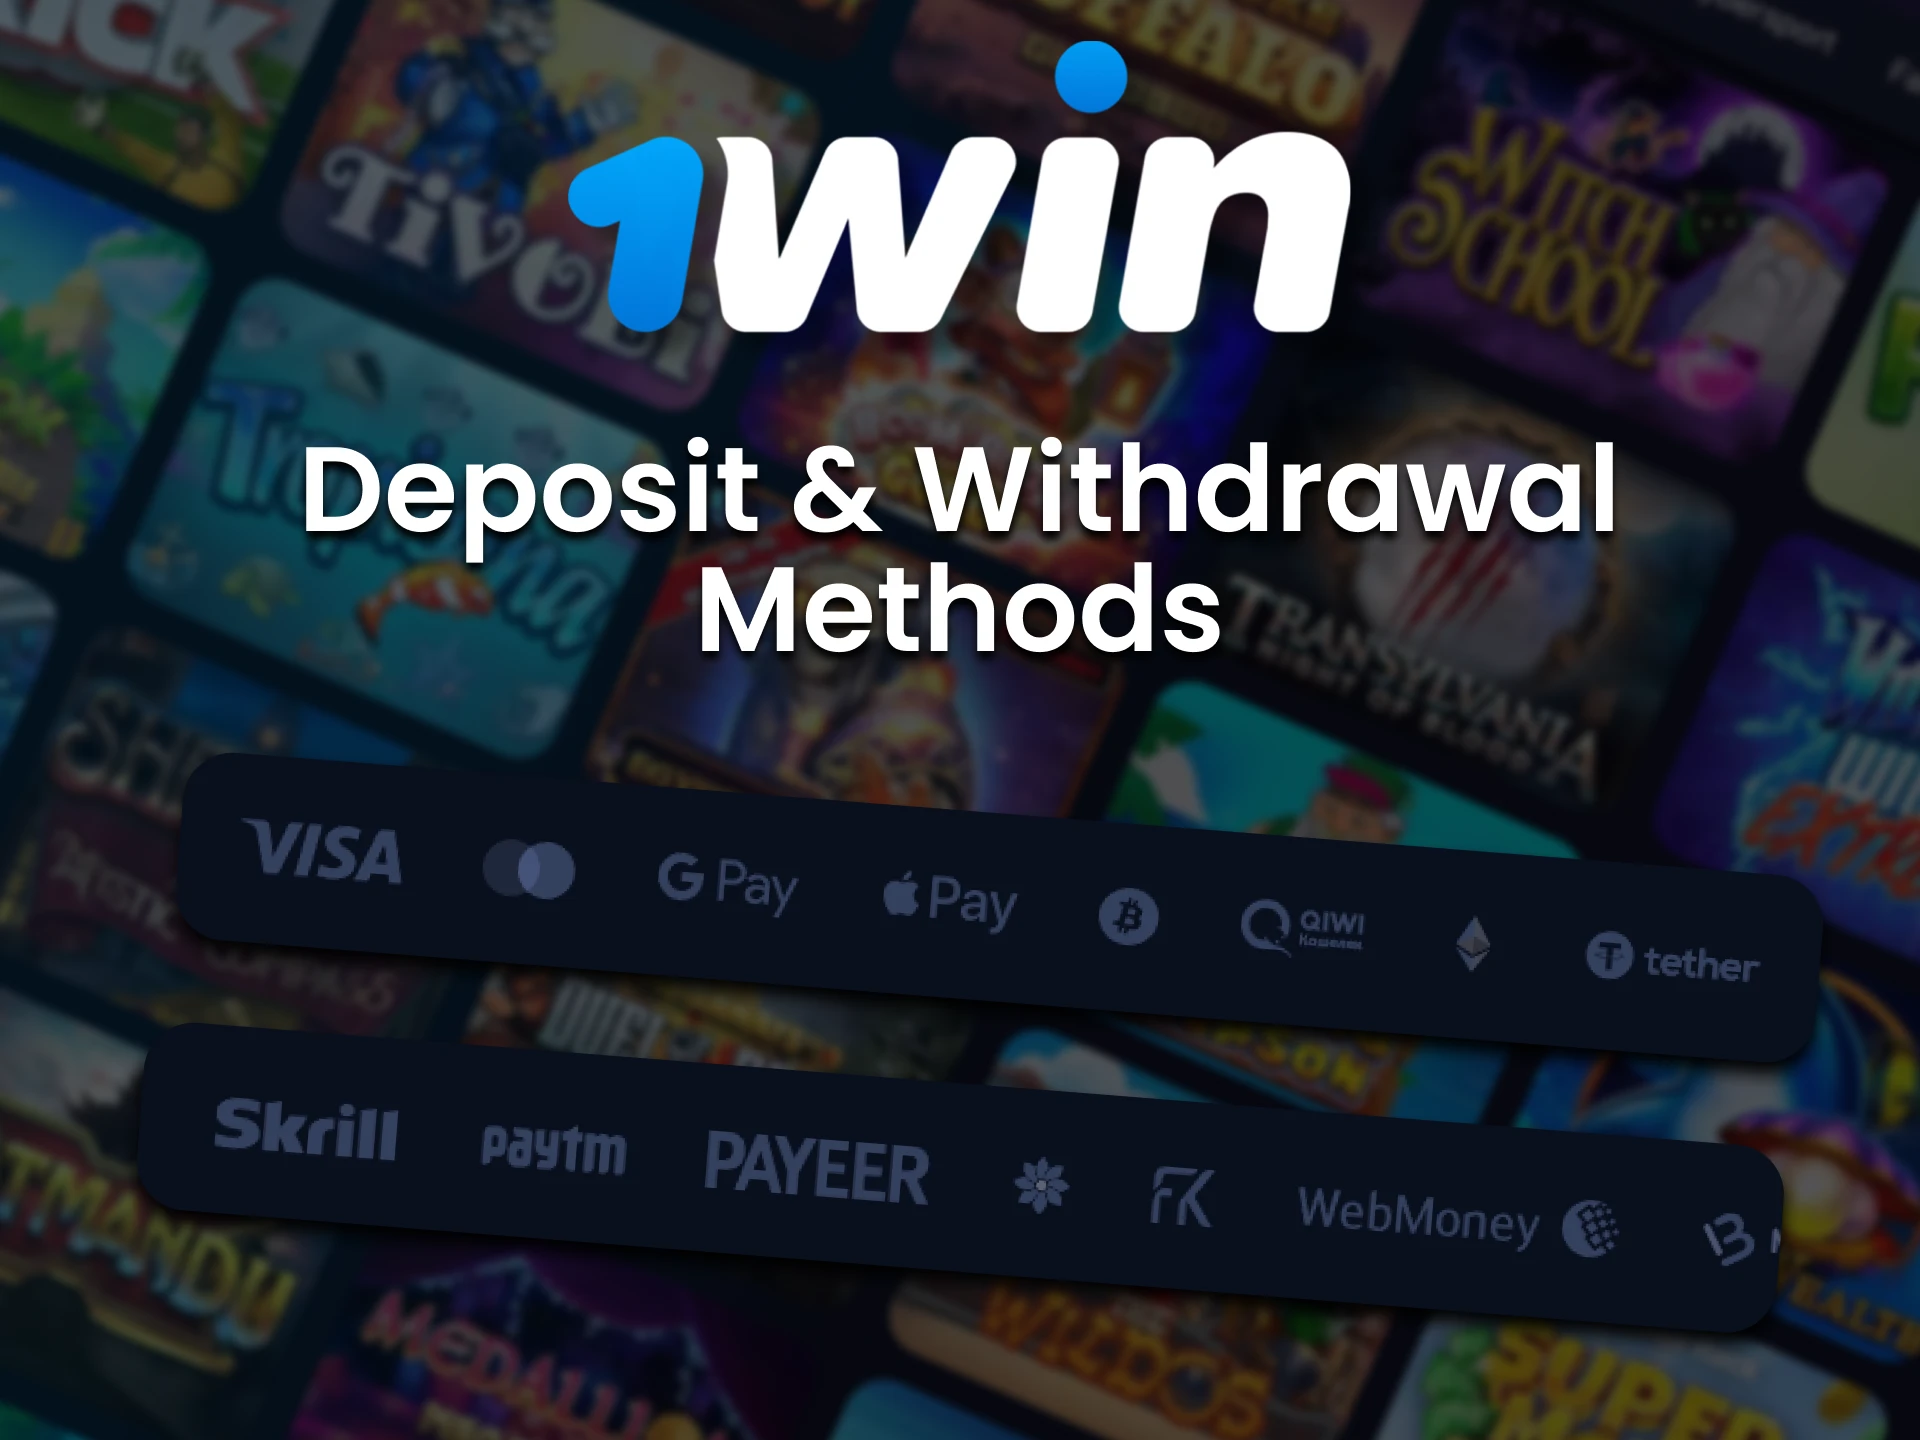 Withdraw and replenish your deposit in a convenient way from 1win.